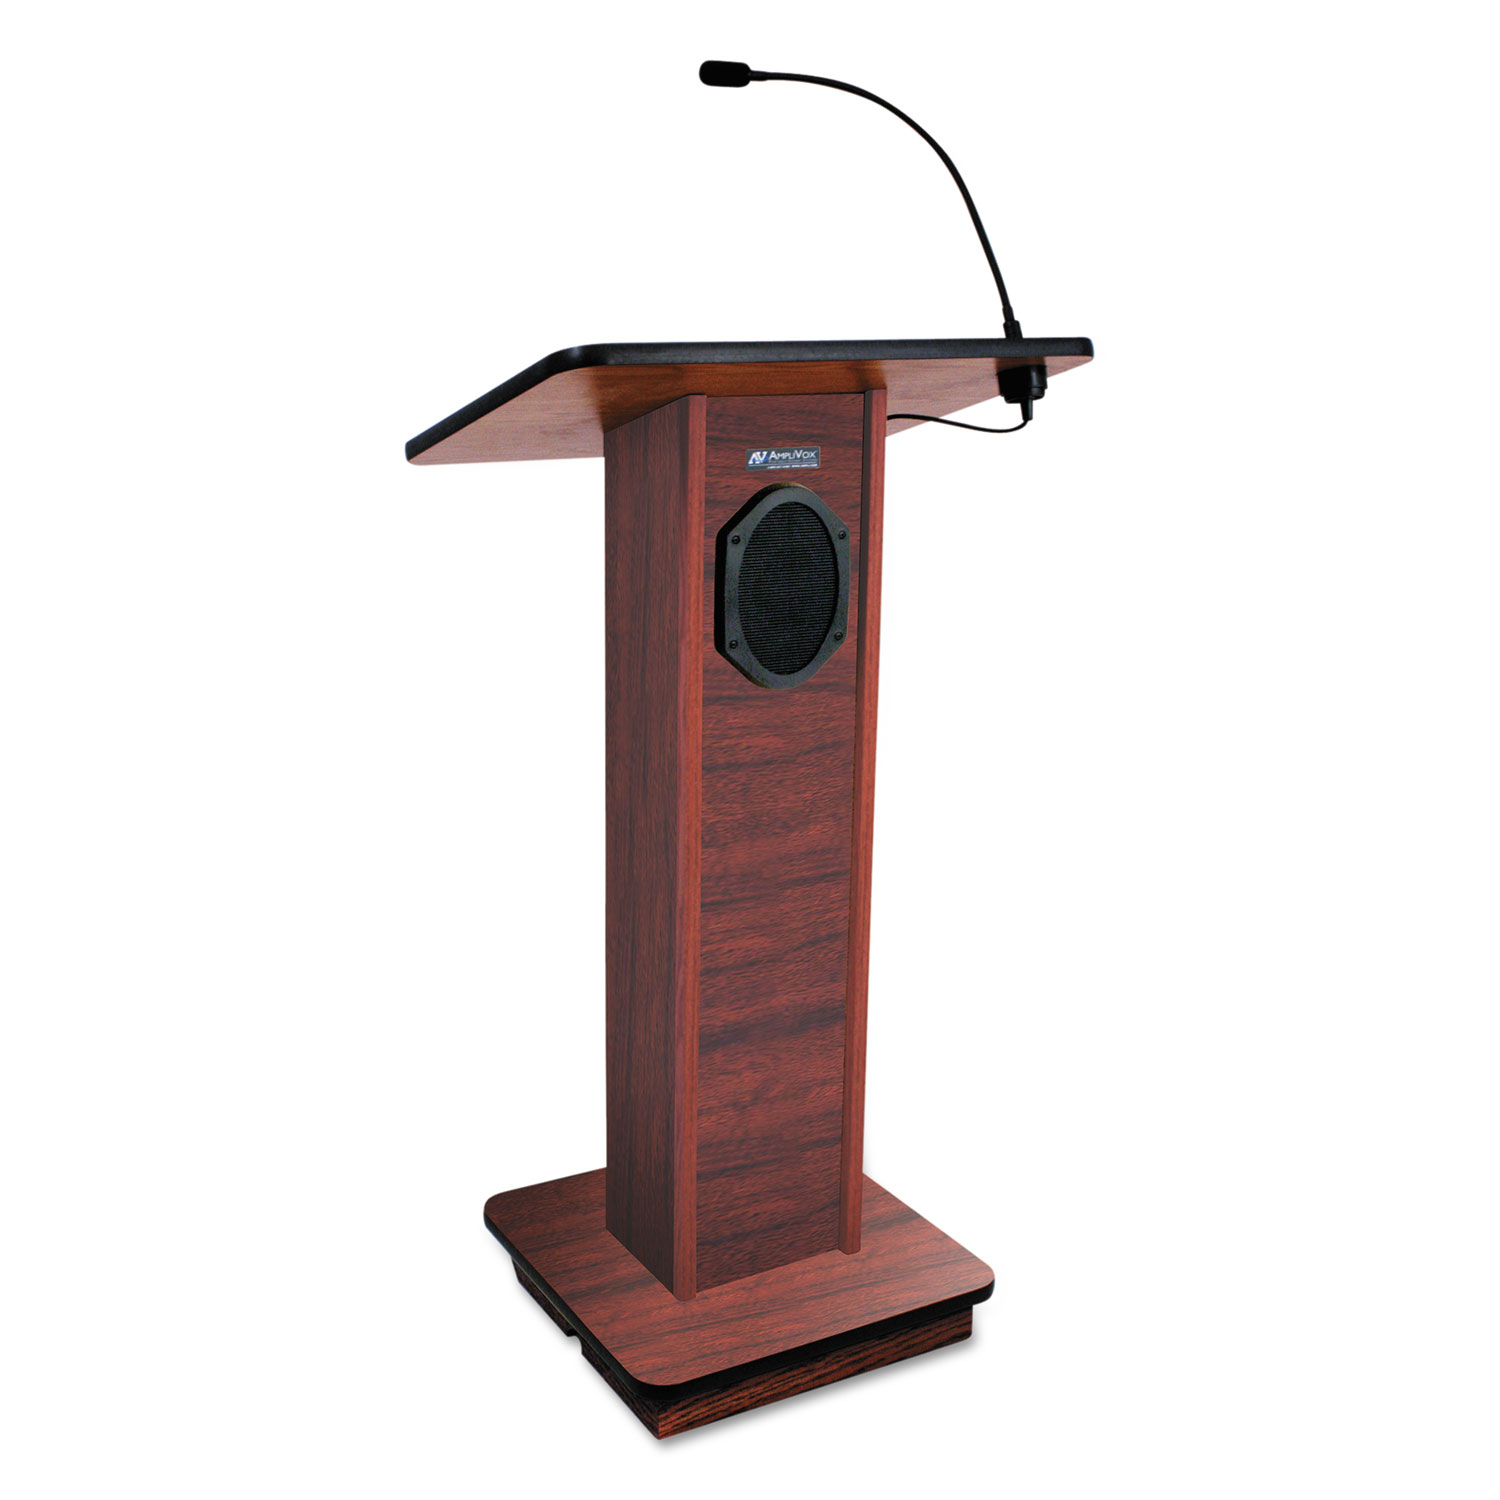  AmpliVox S355-MH Elite Lecterns with Sound System, 24w x 18d x 44h, Mahogany (APLS355MH) 